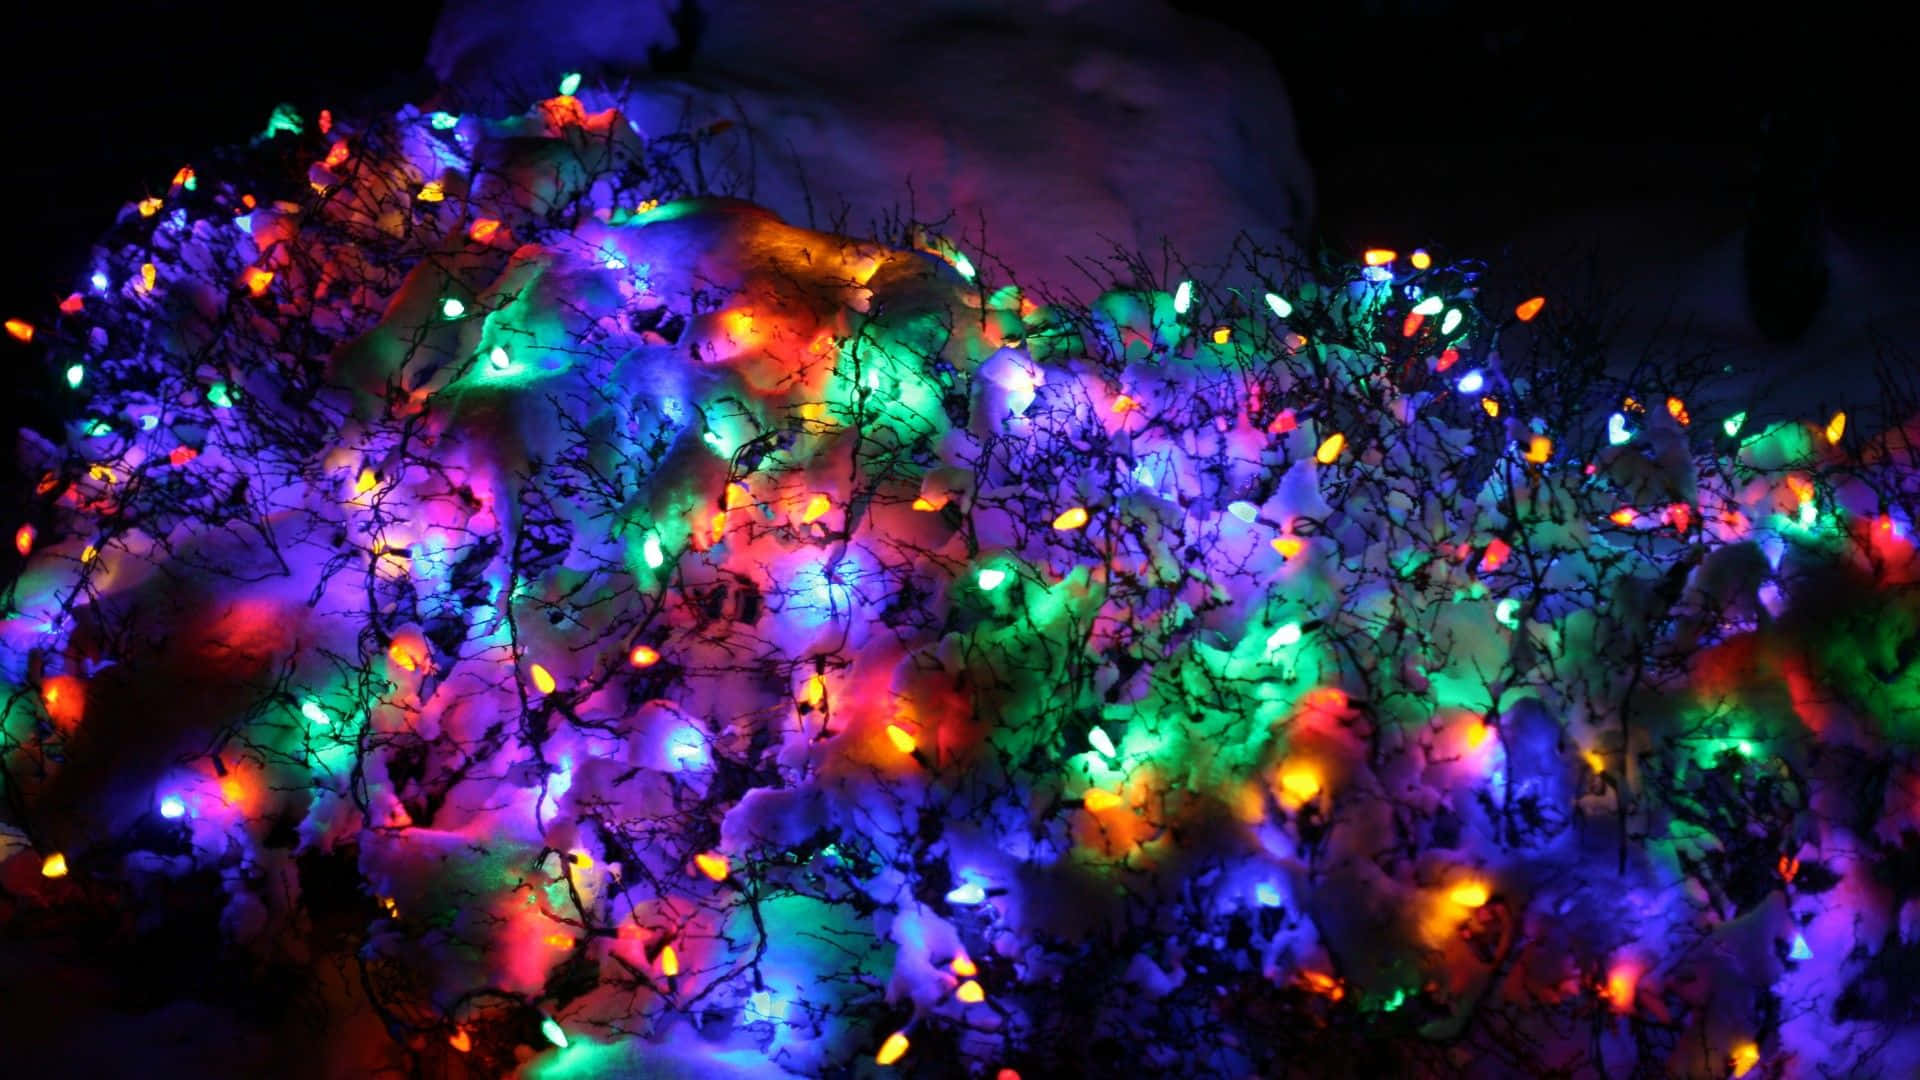 A Colorful Display Of Christmas Lights In The Snow